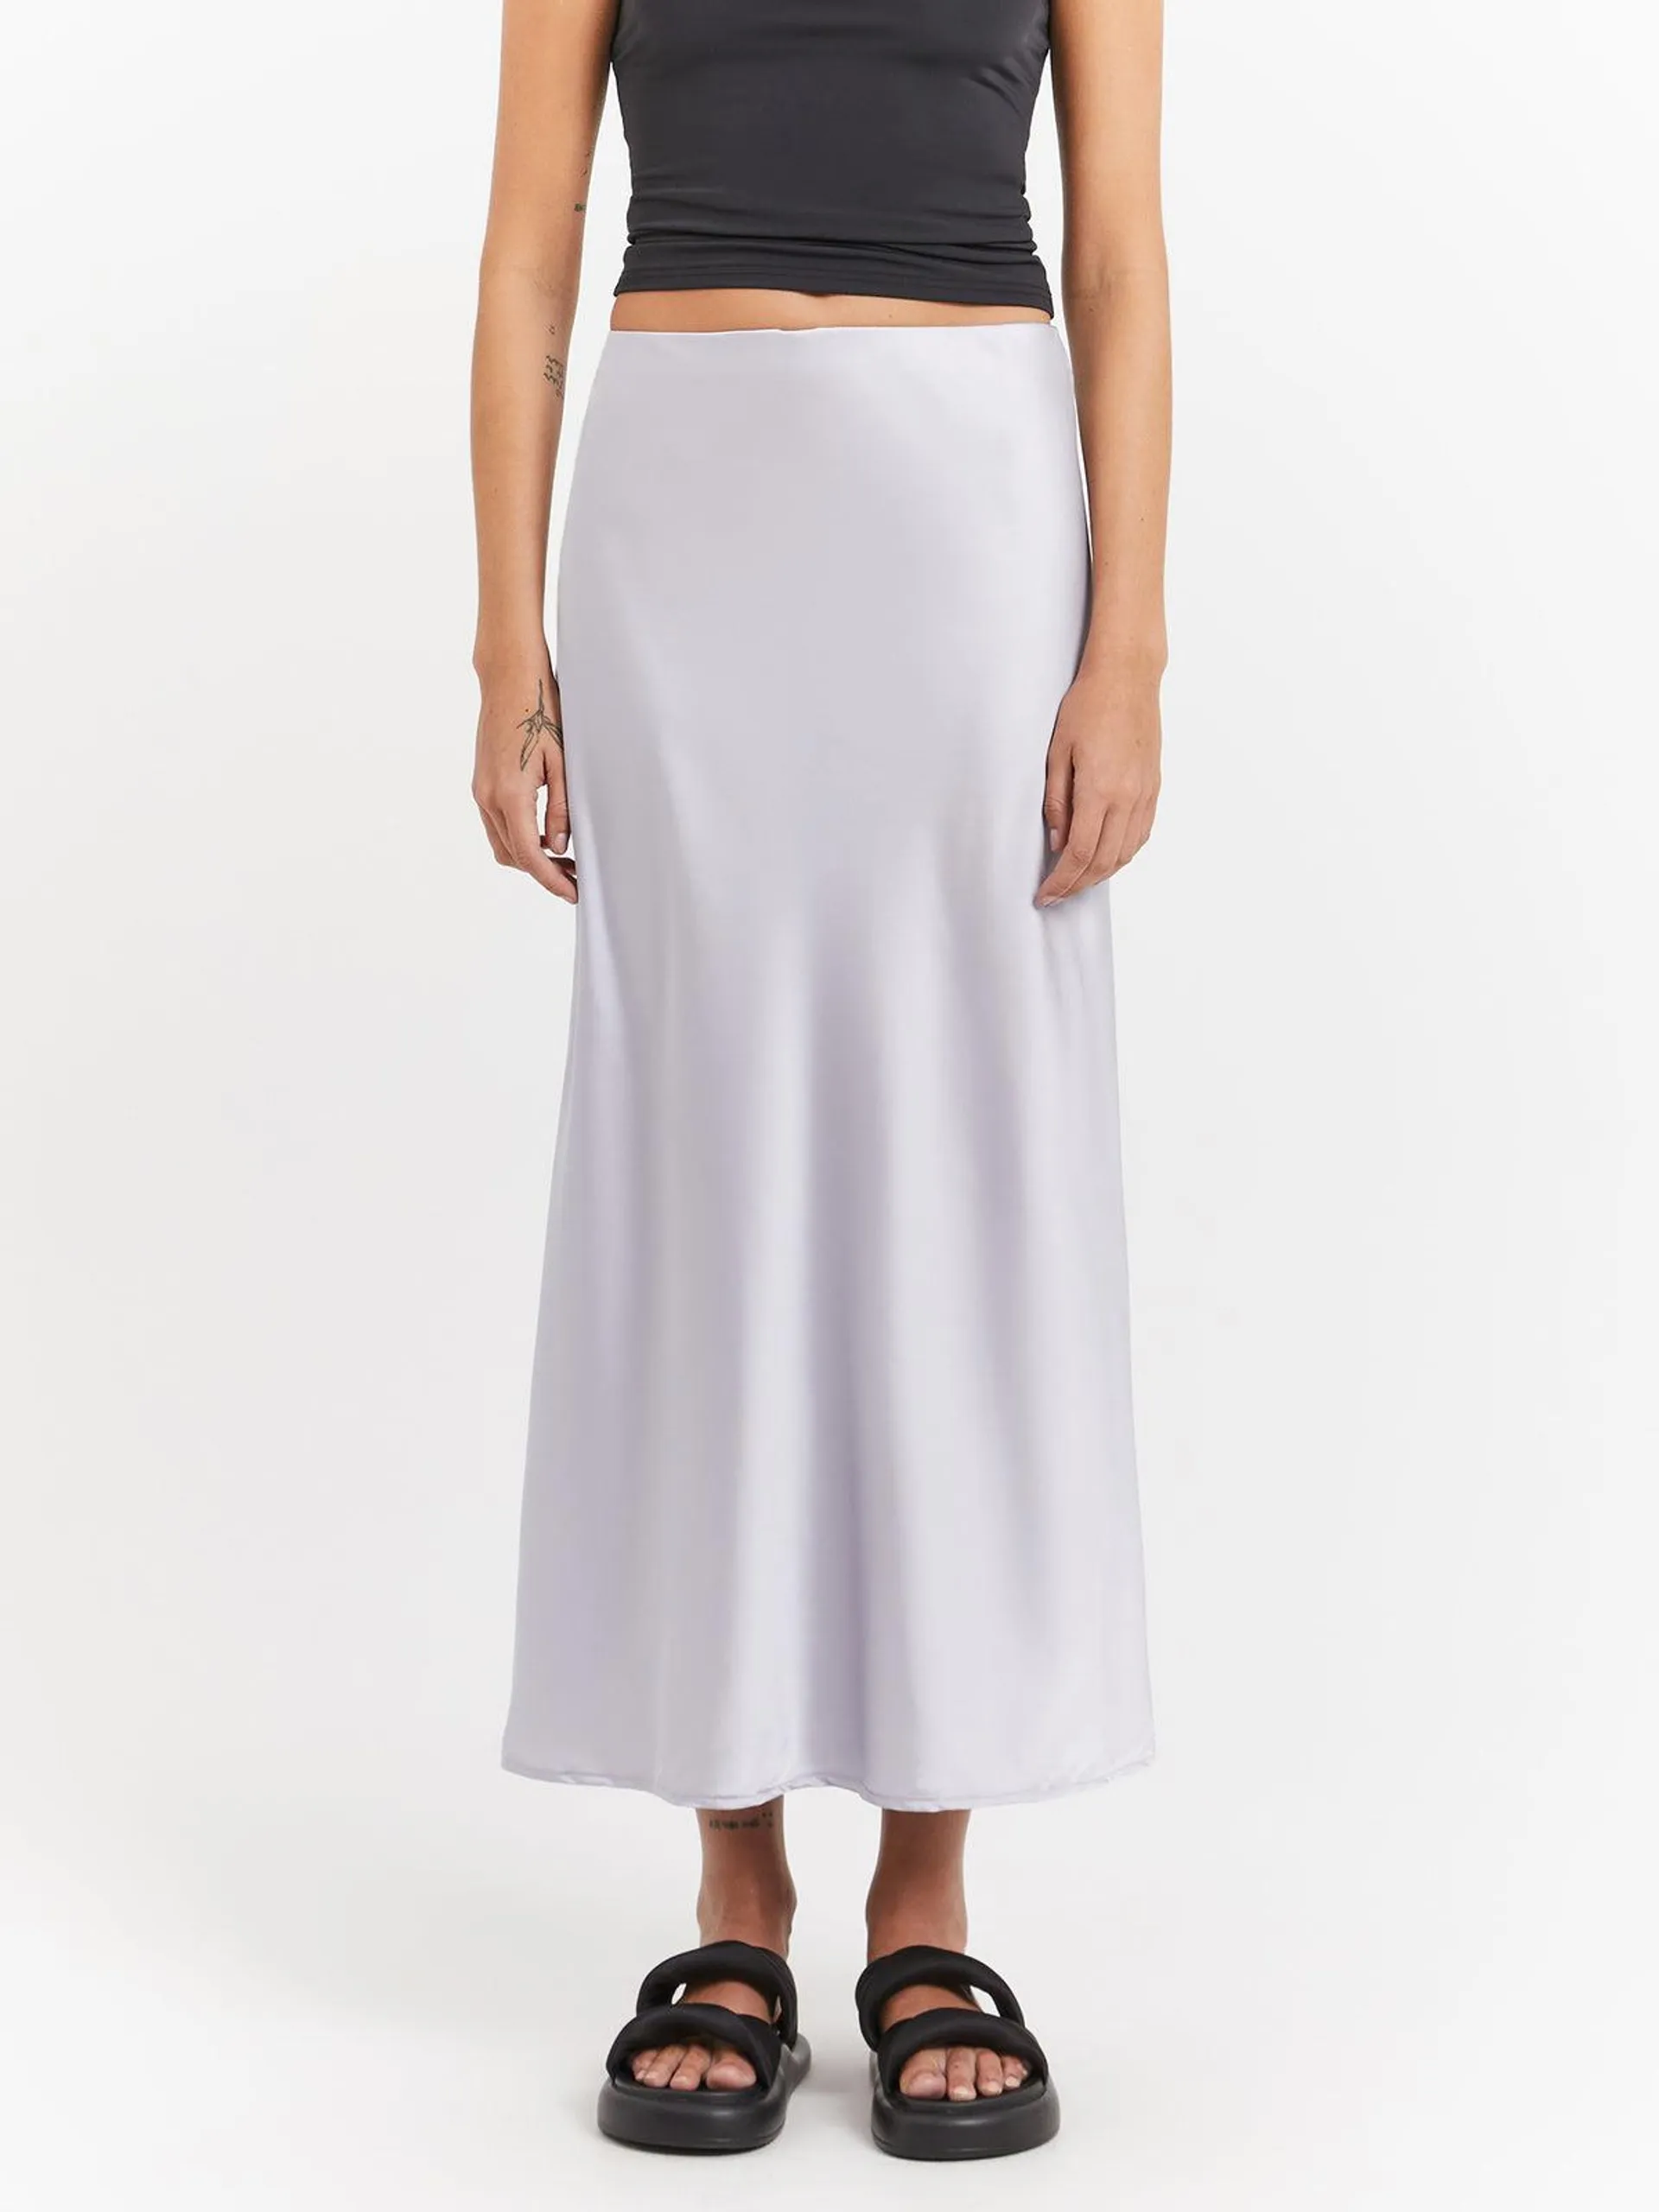 Coral Maxi Skirt in Silver